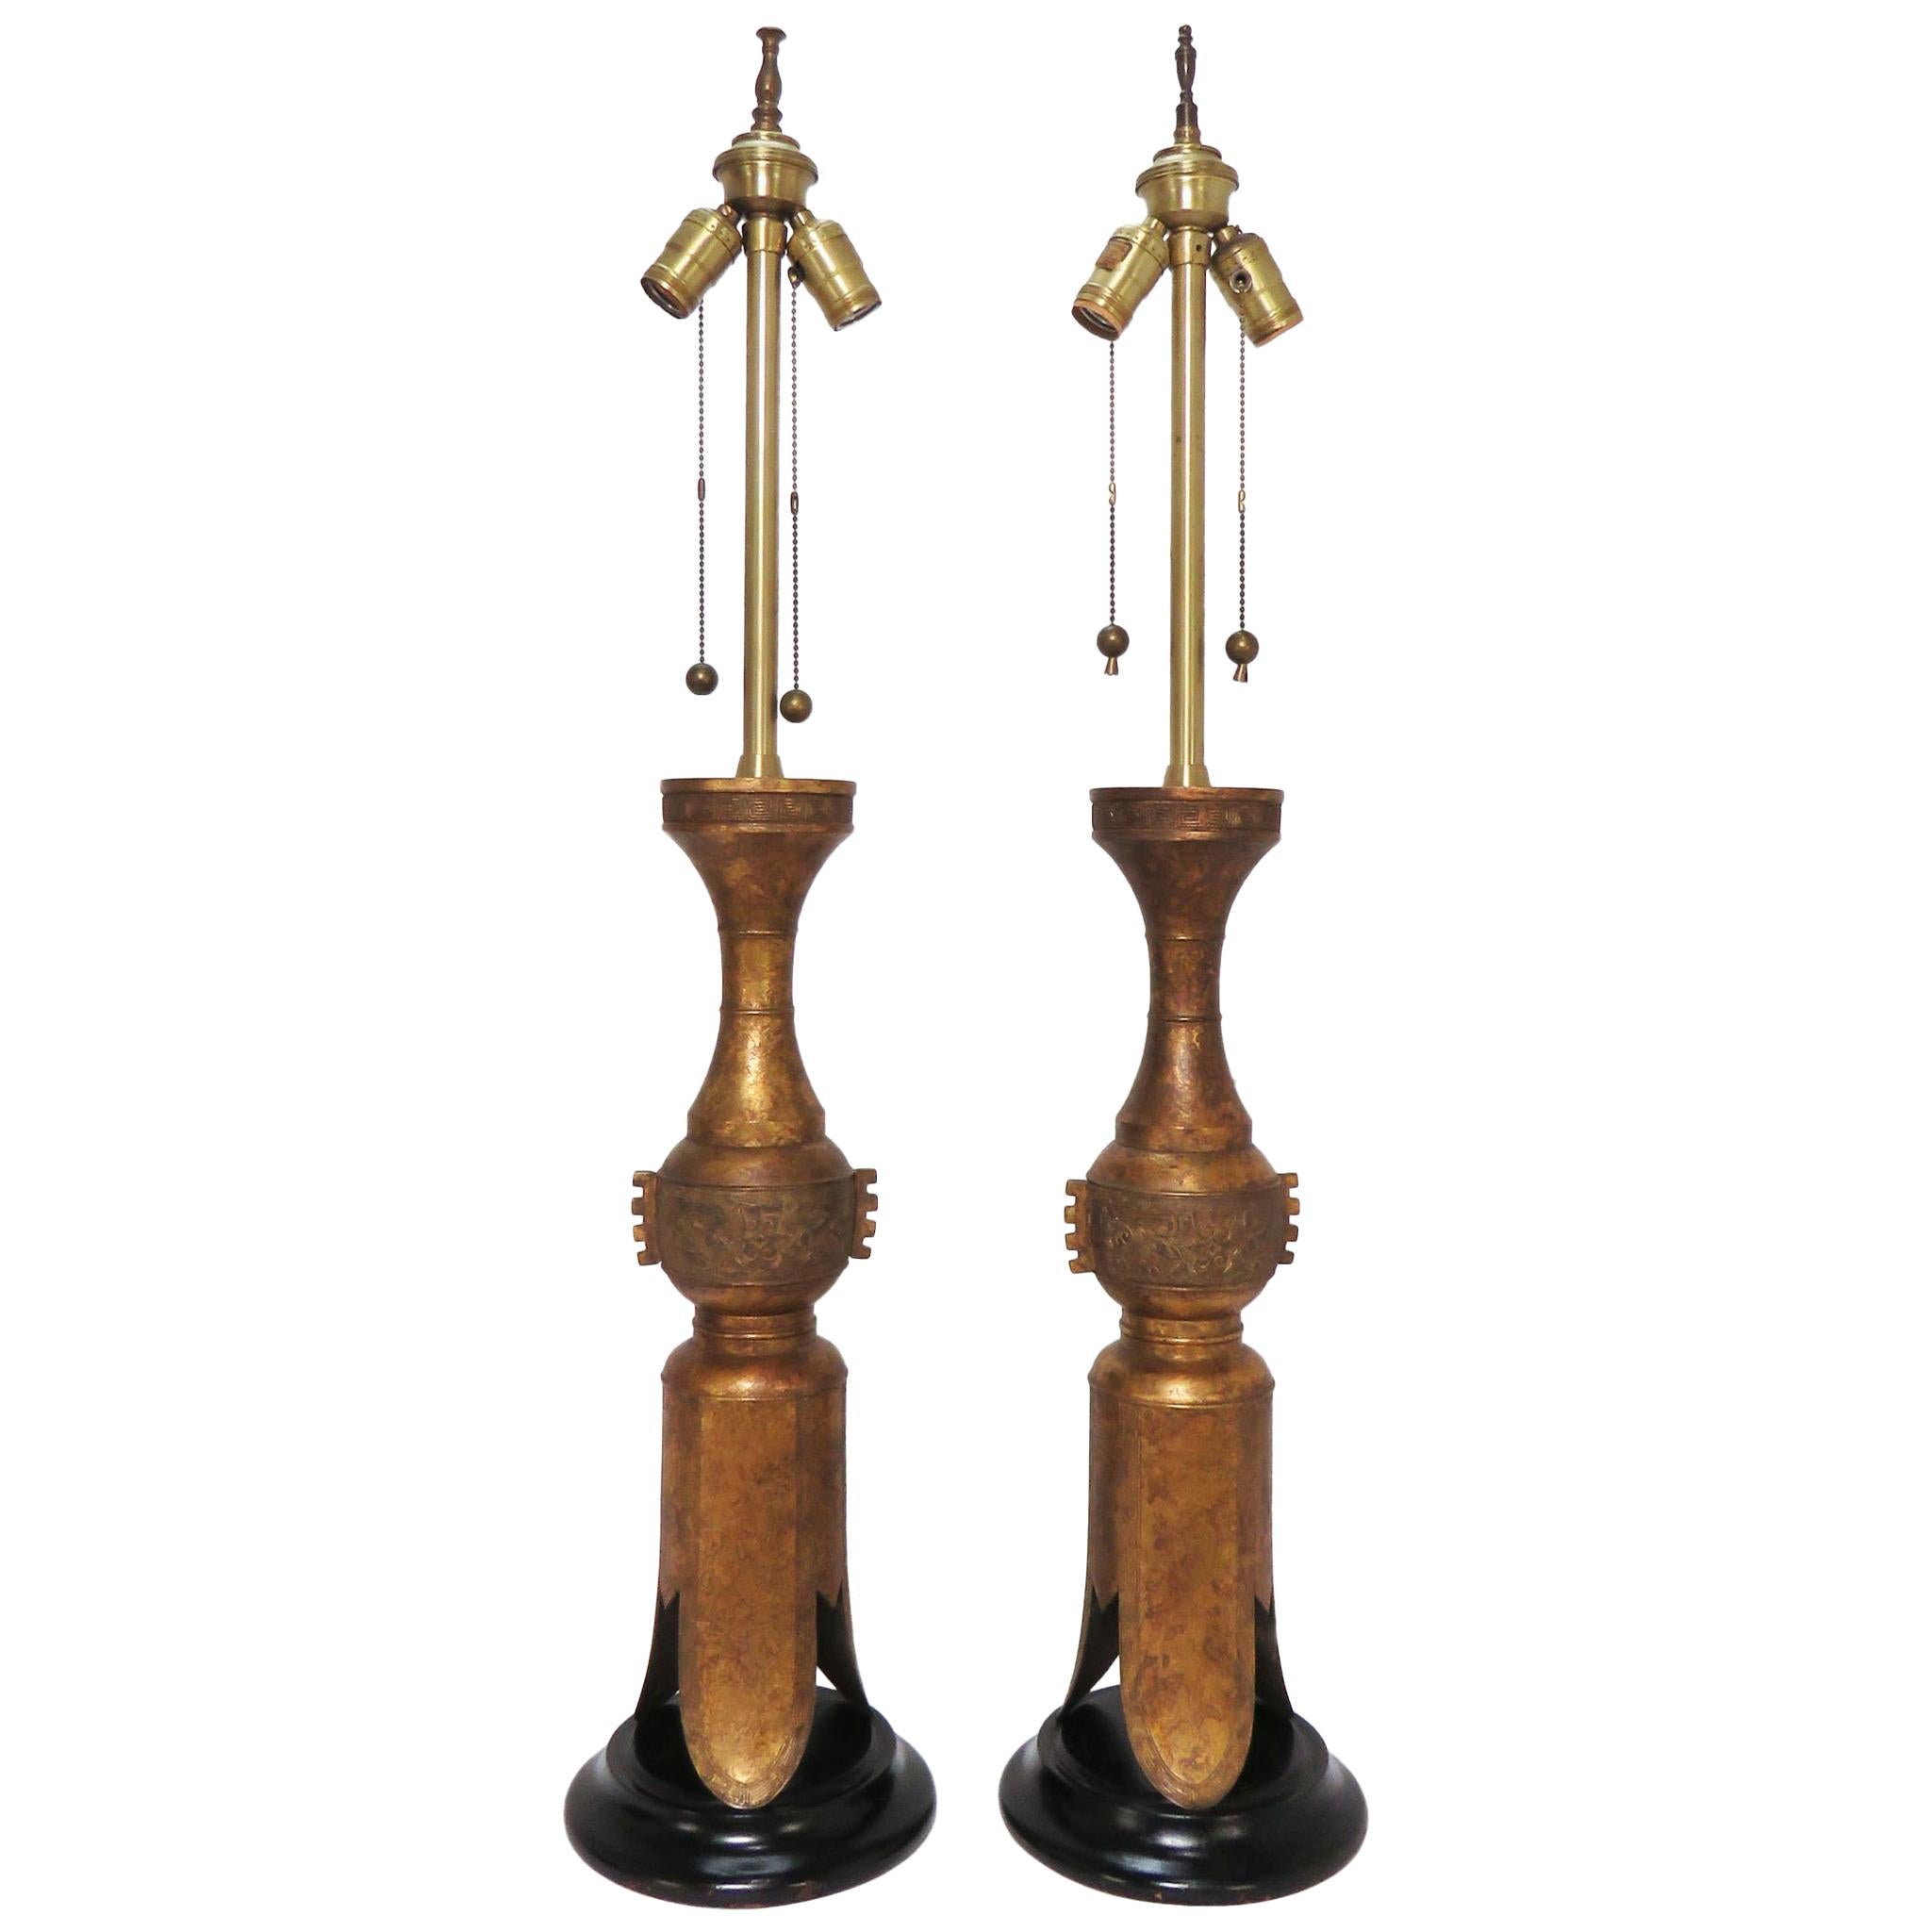 Pair of Marbro Gilded Bronze Table Lamps in Form of Chinese Temple Candleholders